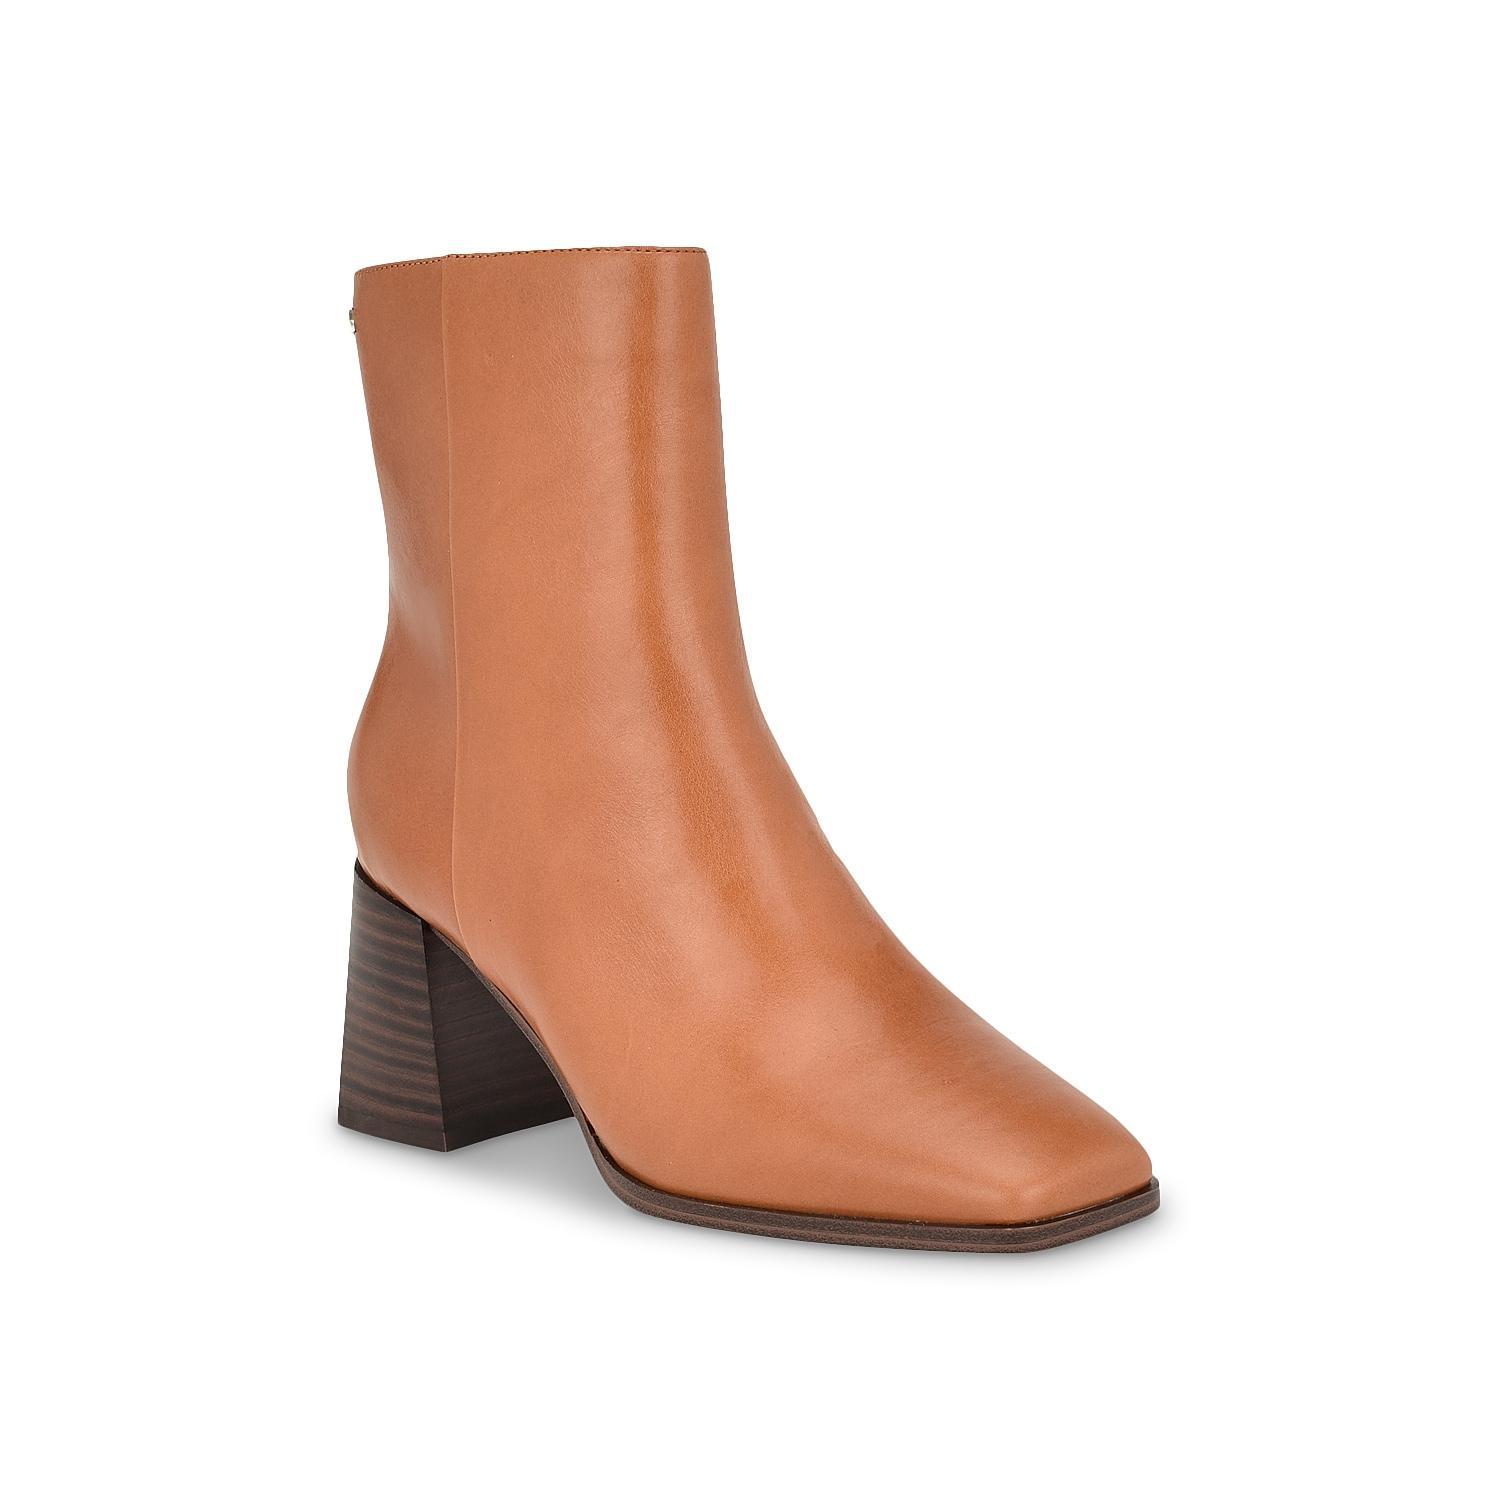 Calvin Klein Broma Bootie Product Image